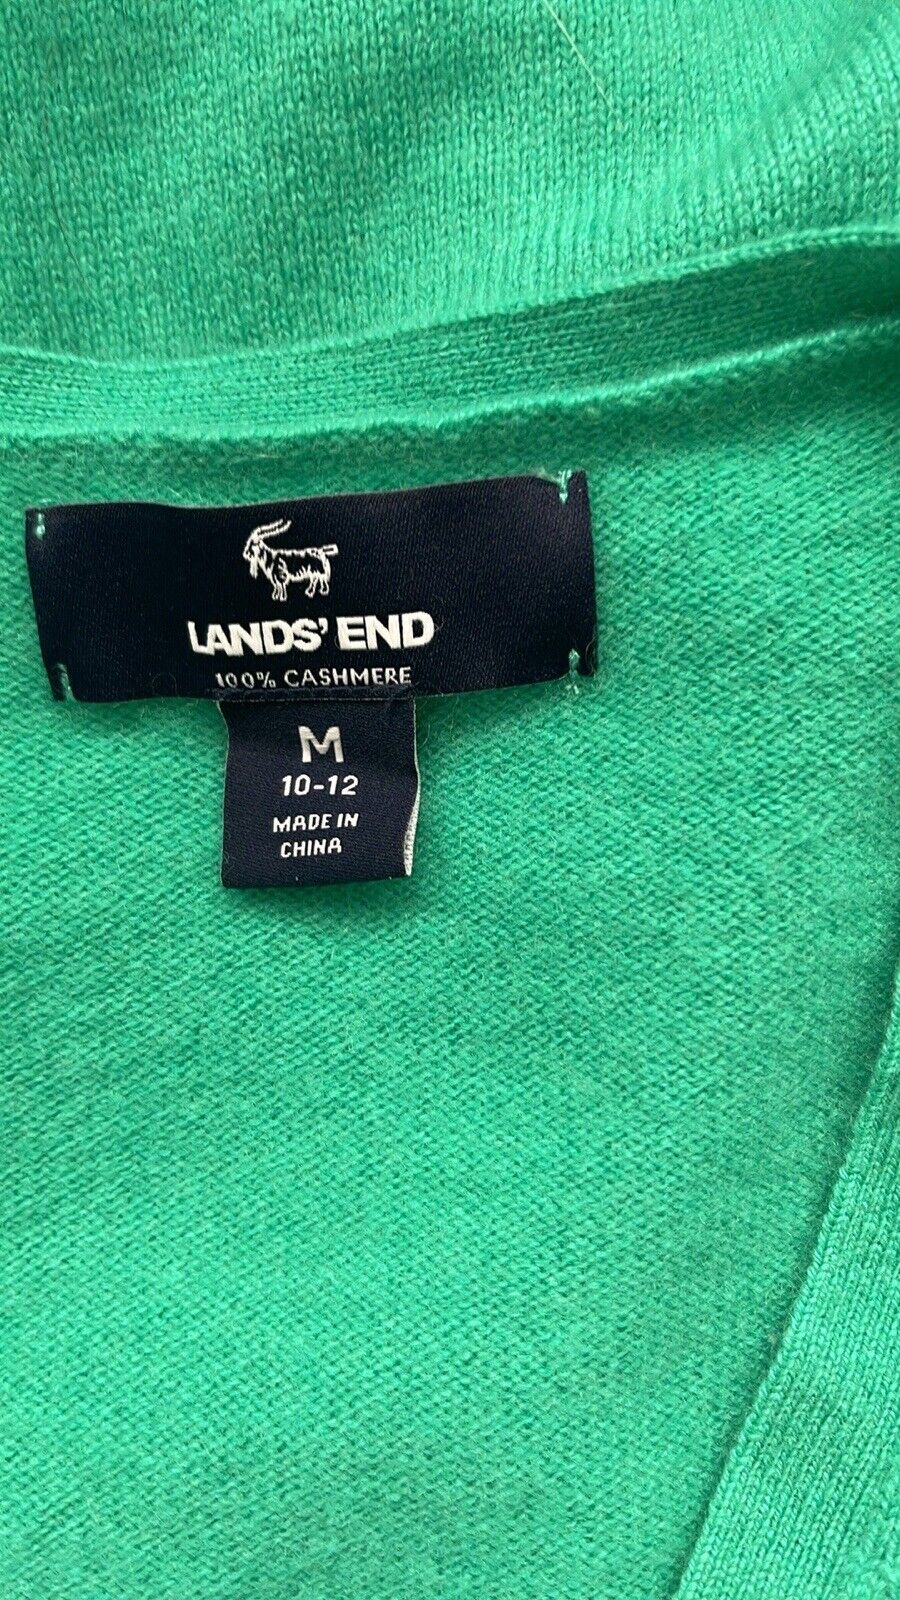 Lands' End Cashmere Sweater Women’s  M Green - image 5